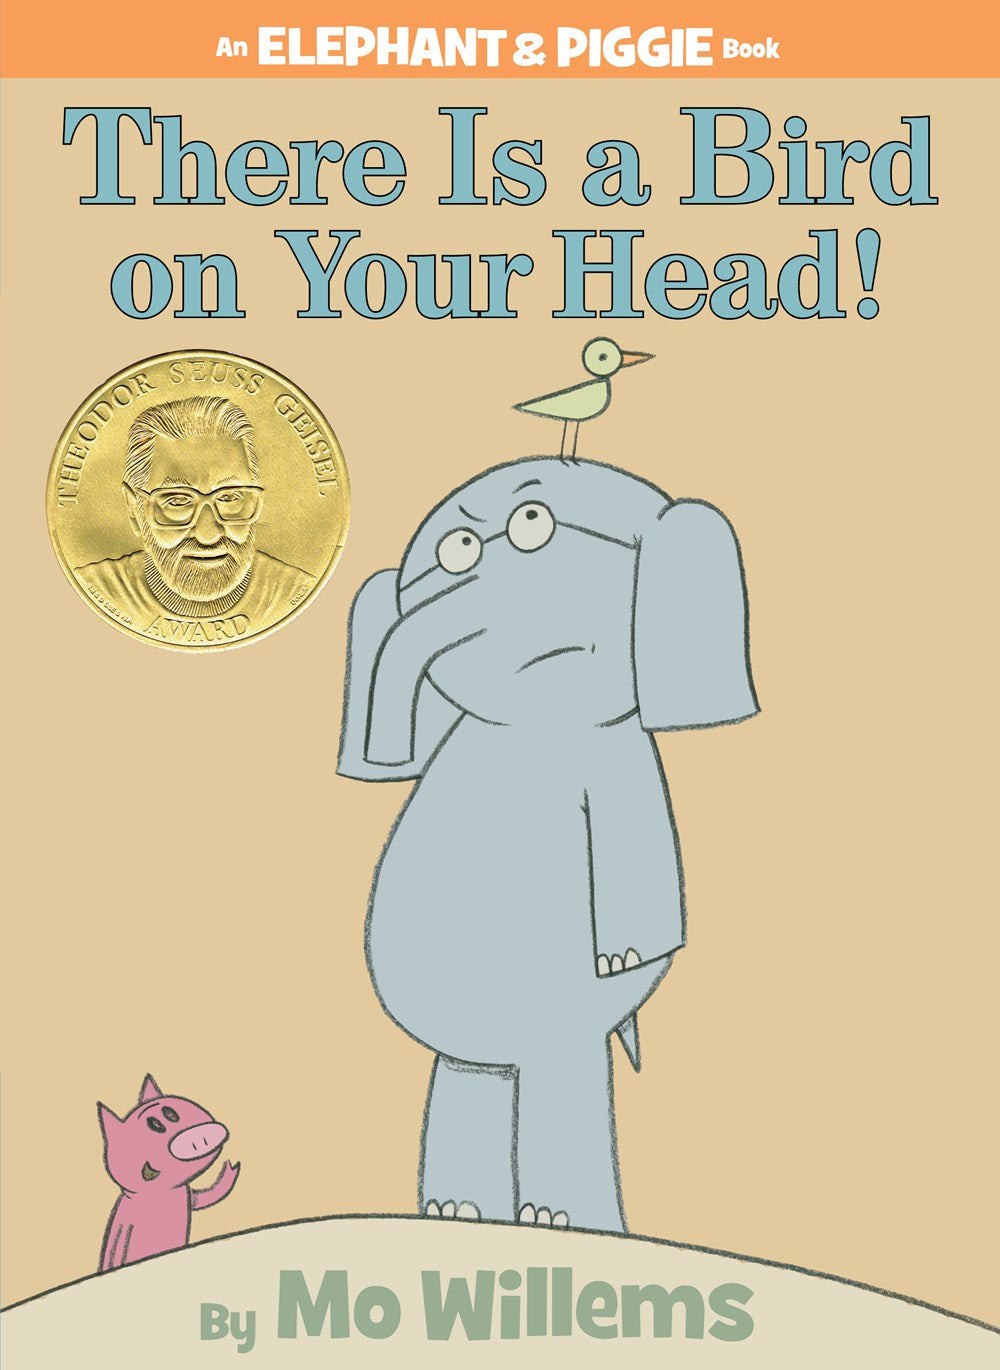 There Is A Bird on Your Head! by Mo Willems (An Elephant & Piggie Book)